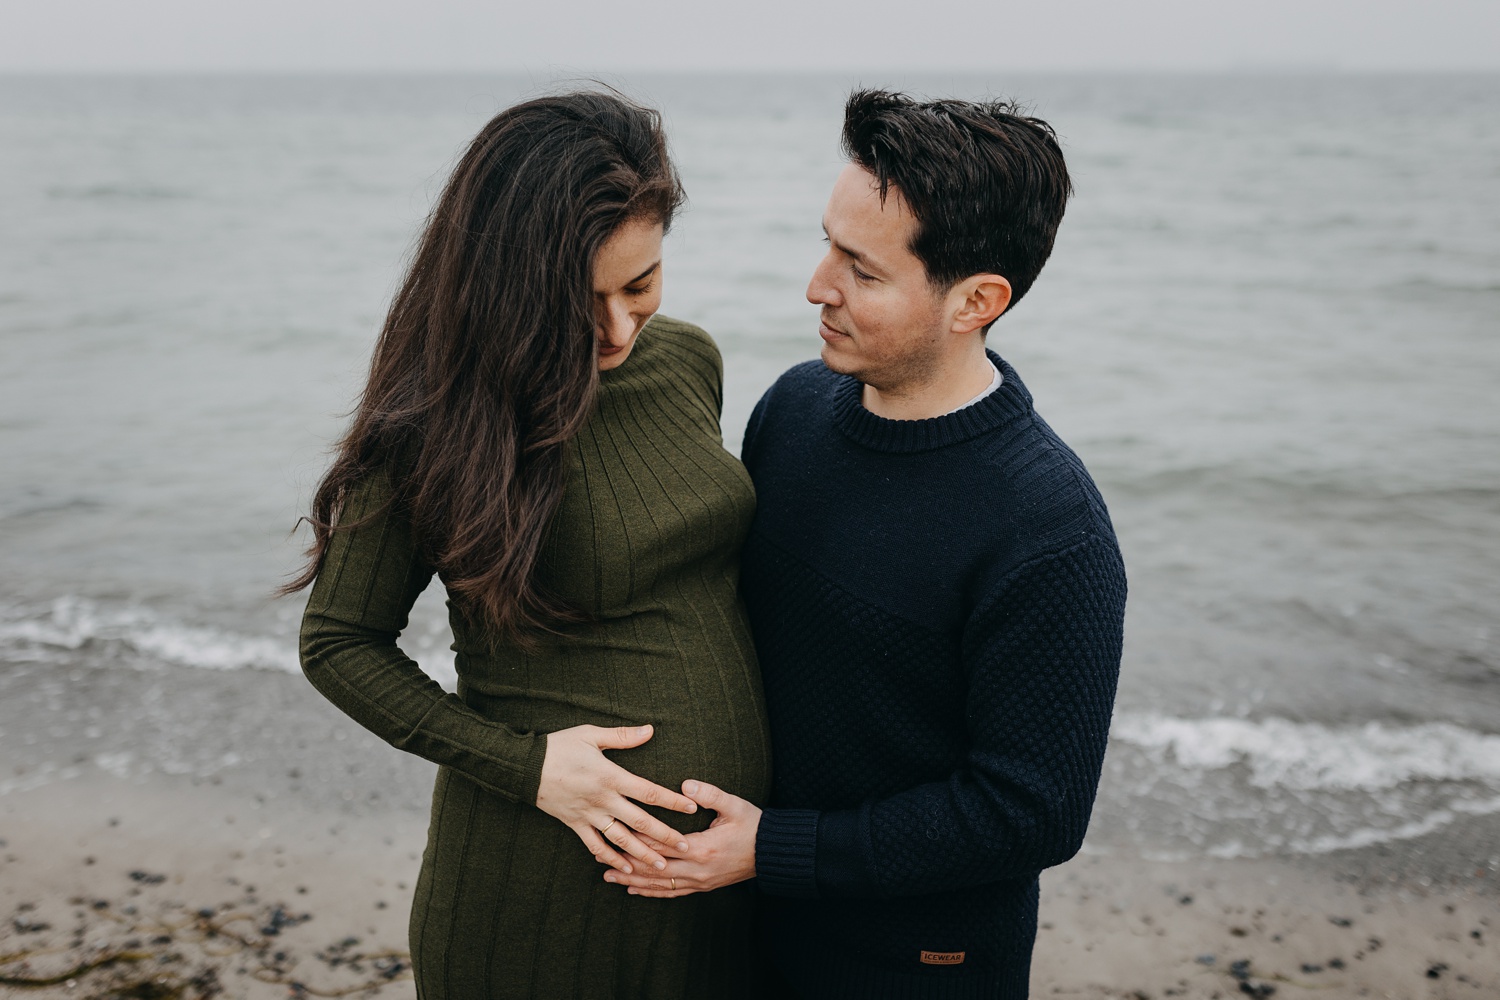 Maternity photography session featuring serene moments by the water